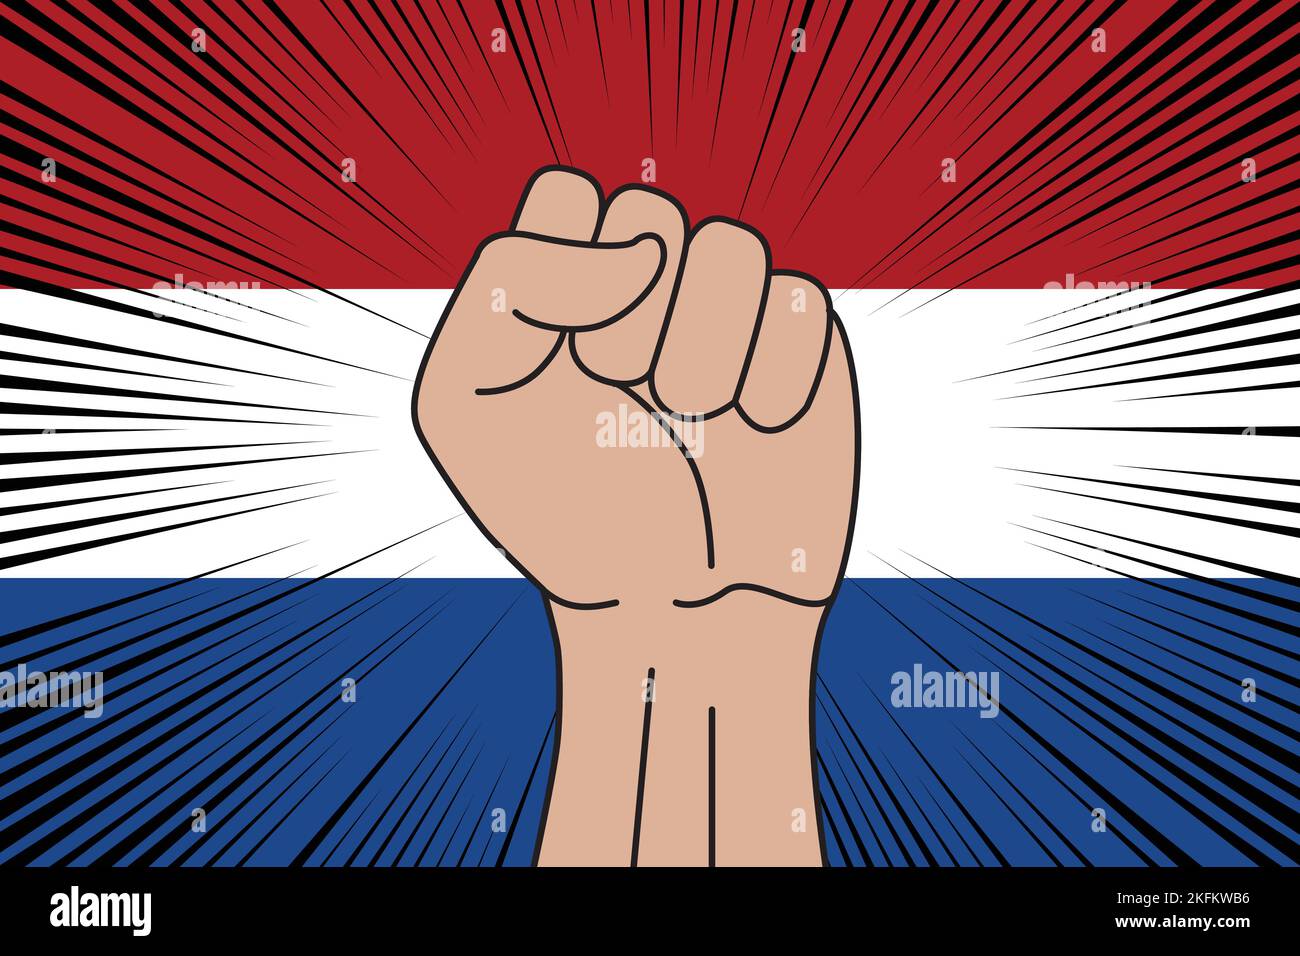 Human fist clenched symbol on flag of Netherlands background. Power and strength logo Stock Vector